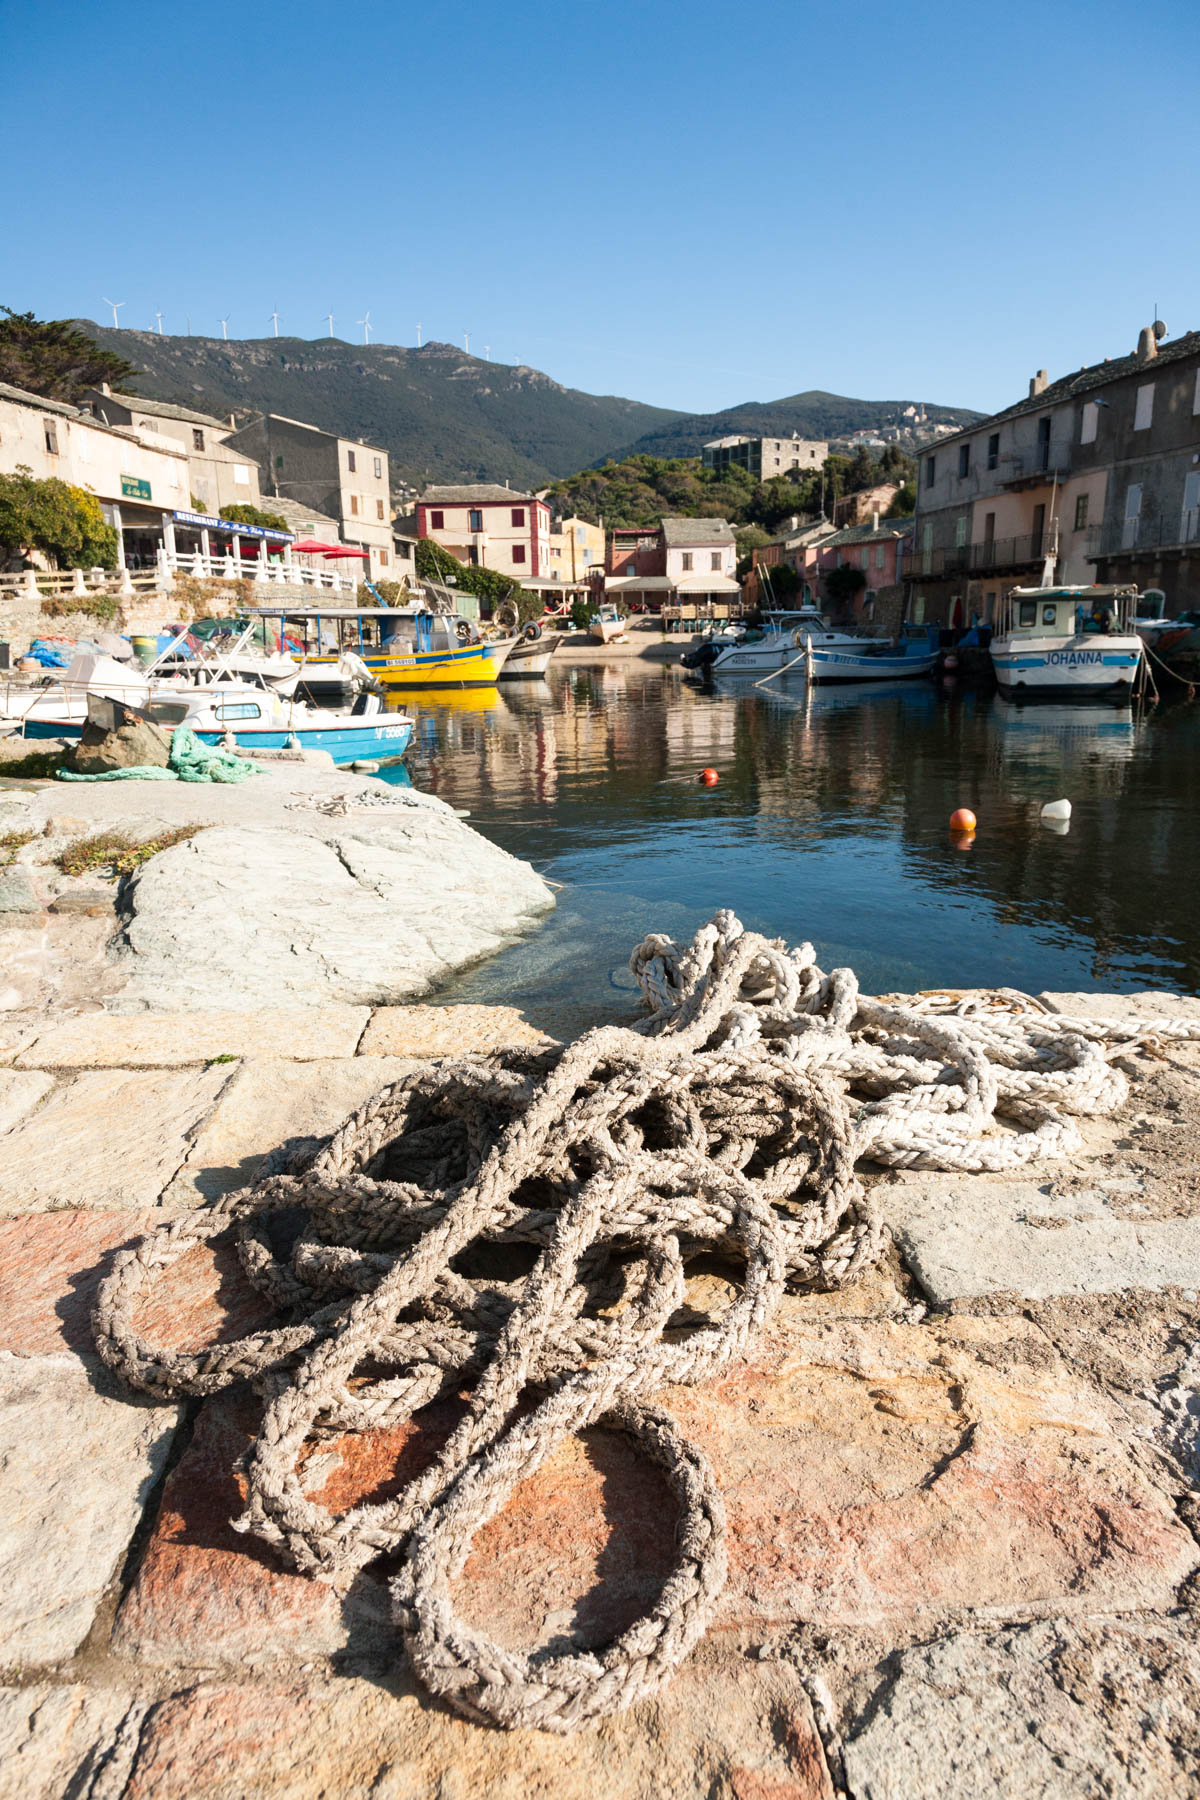 View inland from the Port of Centuri in Corsica, visible are the village, rope in the foreground, fishing vessels and the a wind farm on the hills behind.